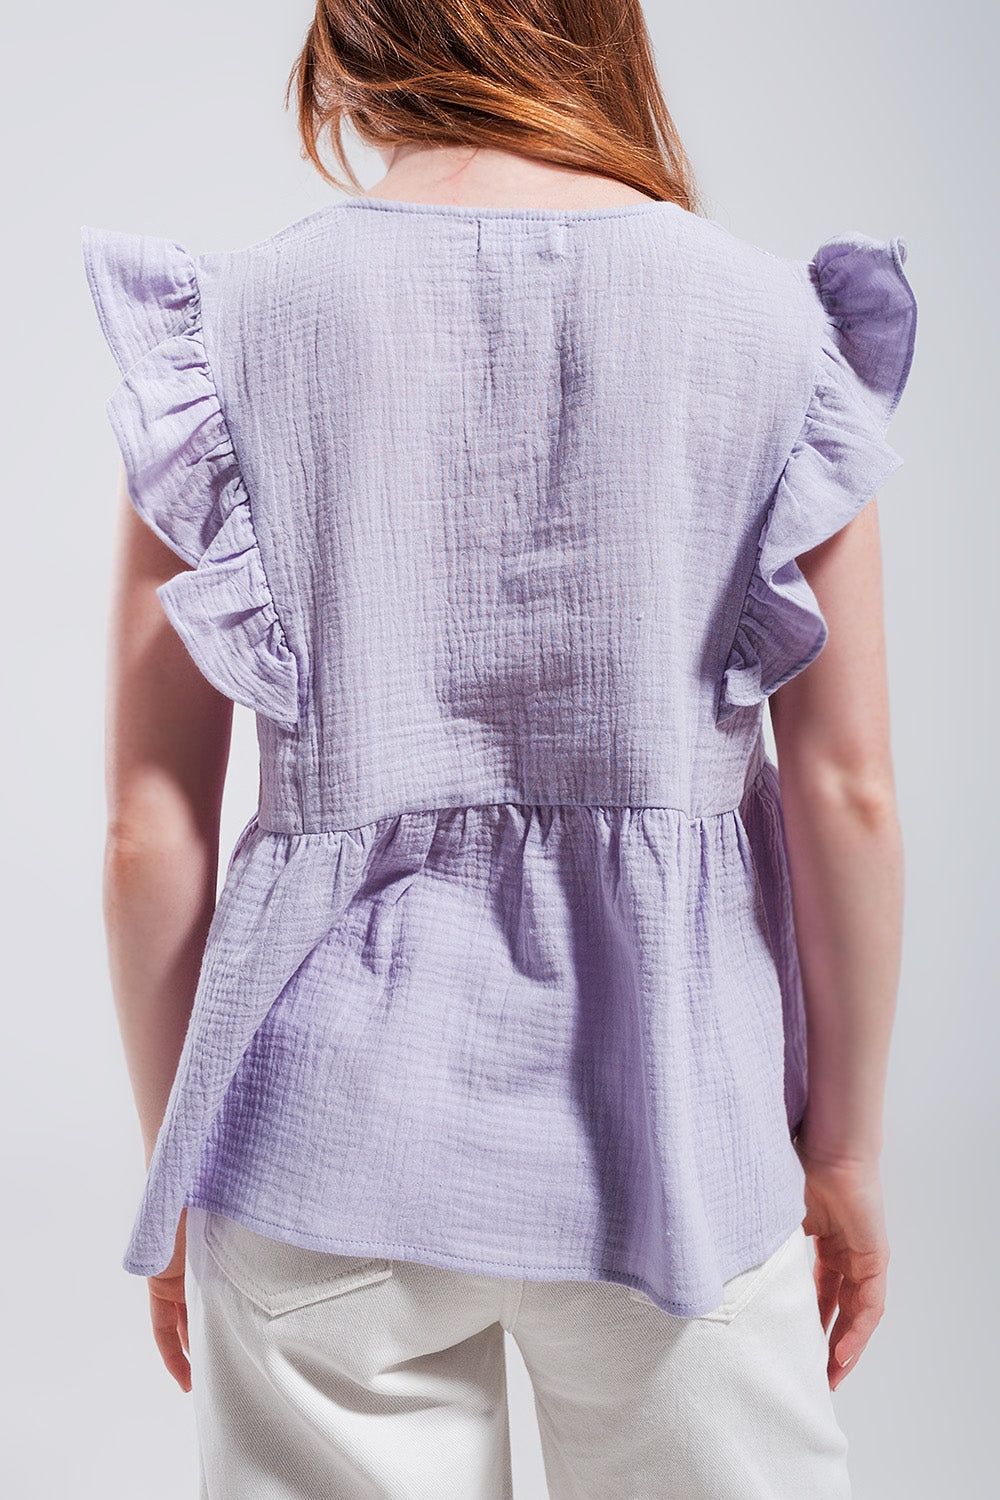 Cotton Tank Top With Ruffle Sleeves in Lilac